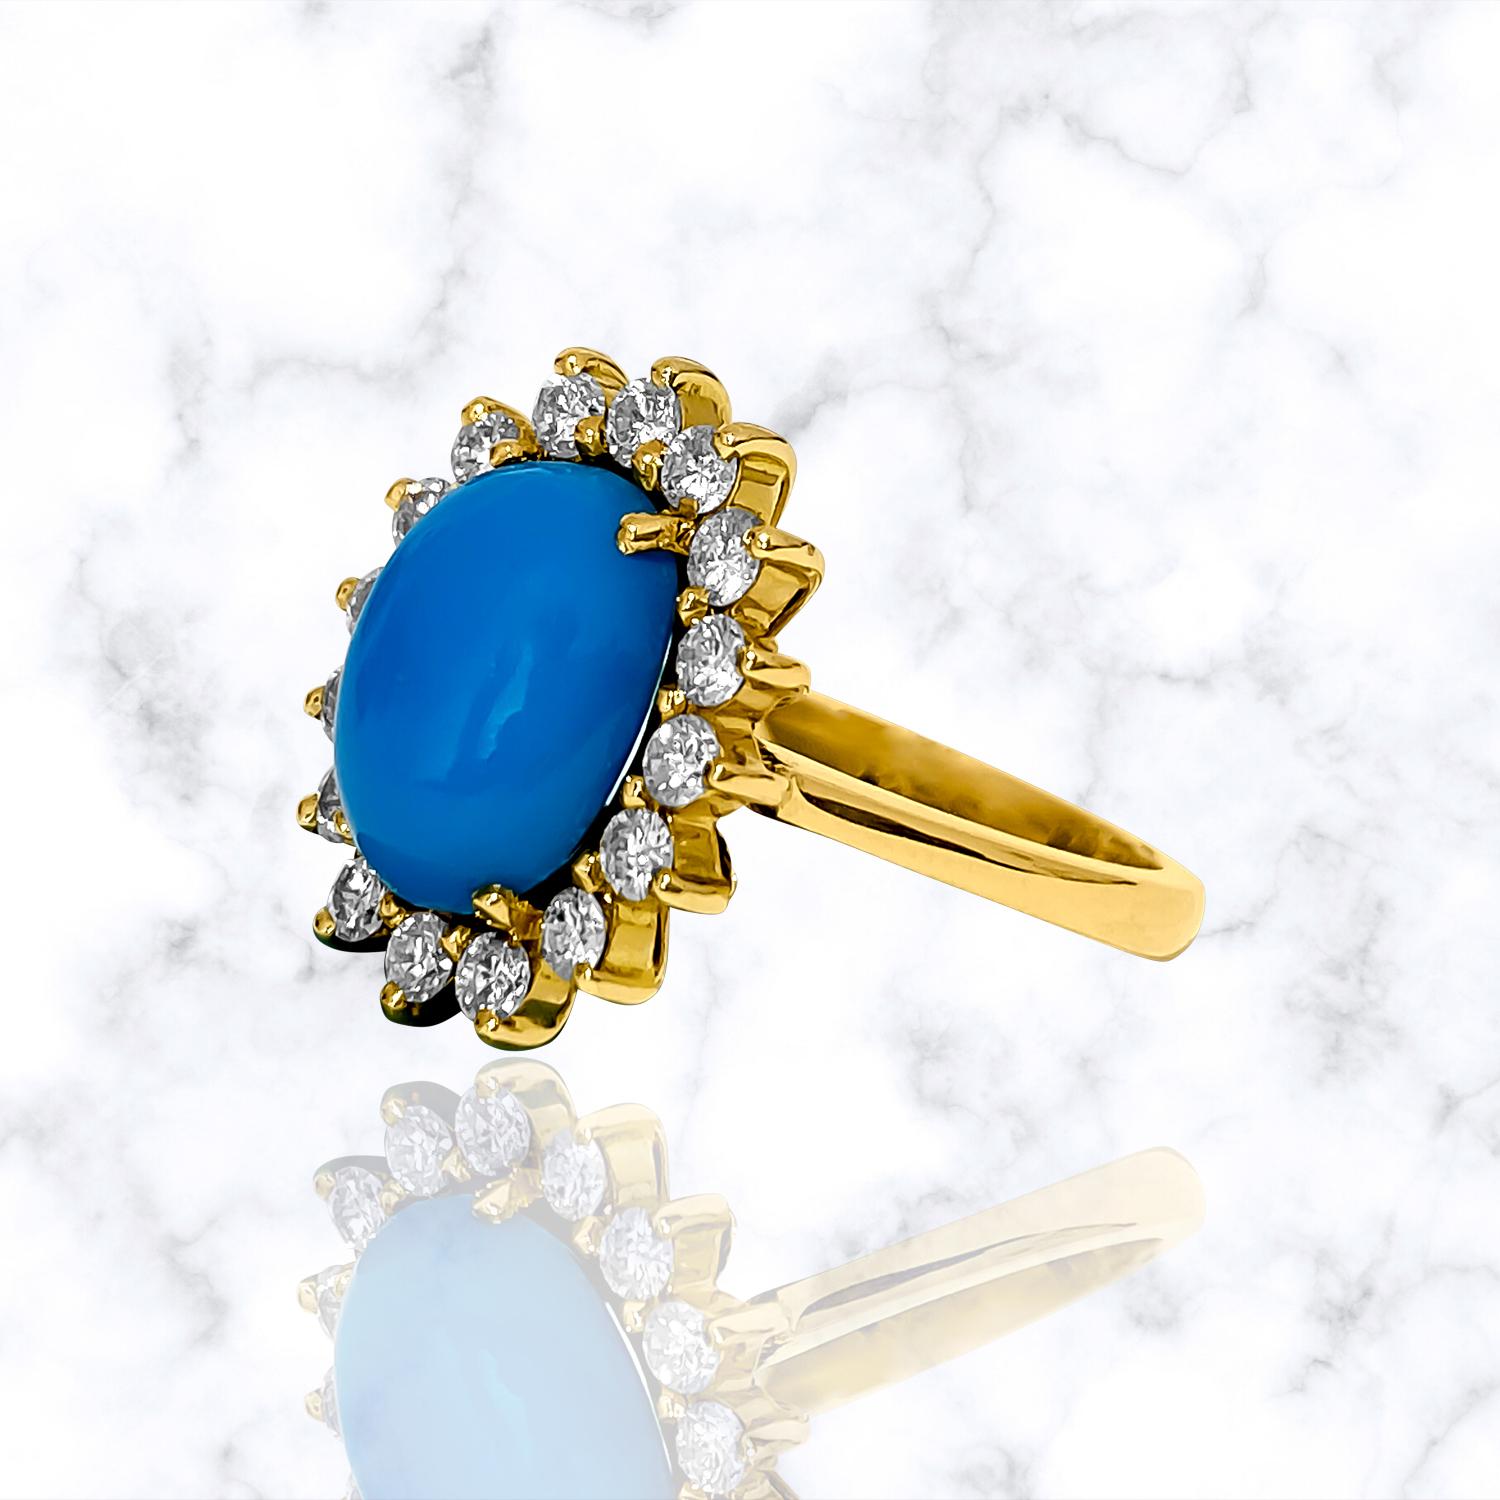 Crafted in luxurious 18K yellow gold, this exquisite cocktail ring features a captivating 2.00 carat oval-shaped turquoise, embraced by a total of 1.00 carats of round brilliant-cut diamonds on the sides. All gems are 100% natural earth mined and